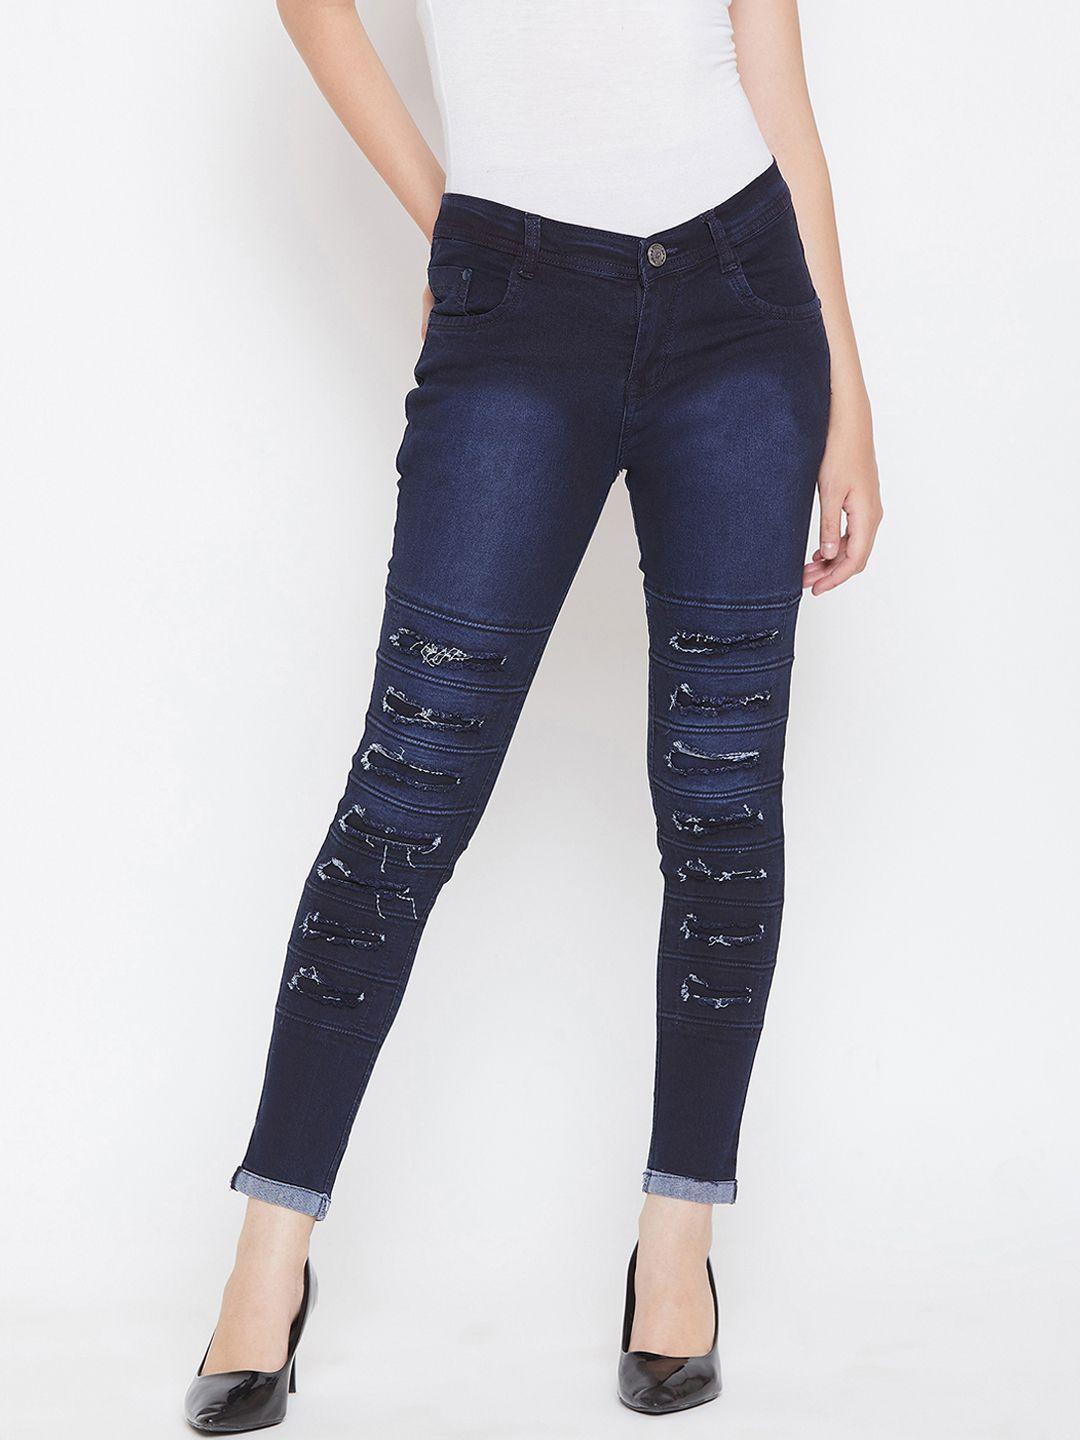 nifty-women-blue-slim-fit-mid-rise-highly-distressed-stretchable-jeans